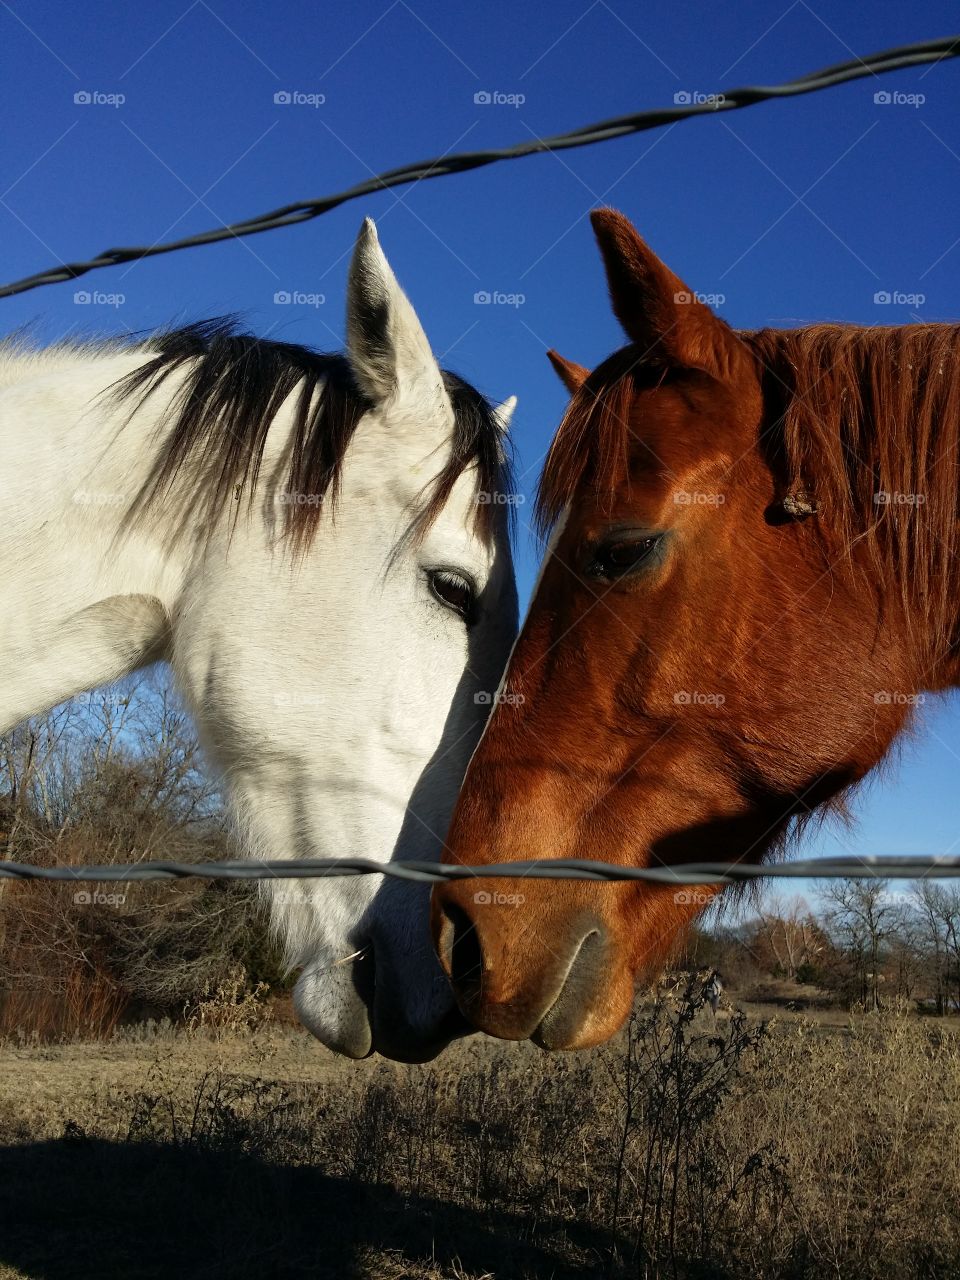 A Gray And A Sorrel Horse Greeting Each Other Closeup